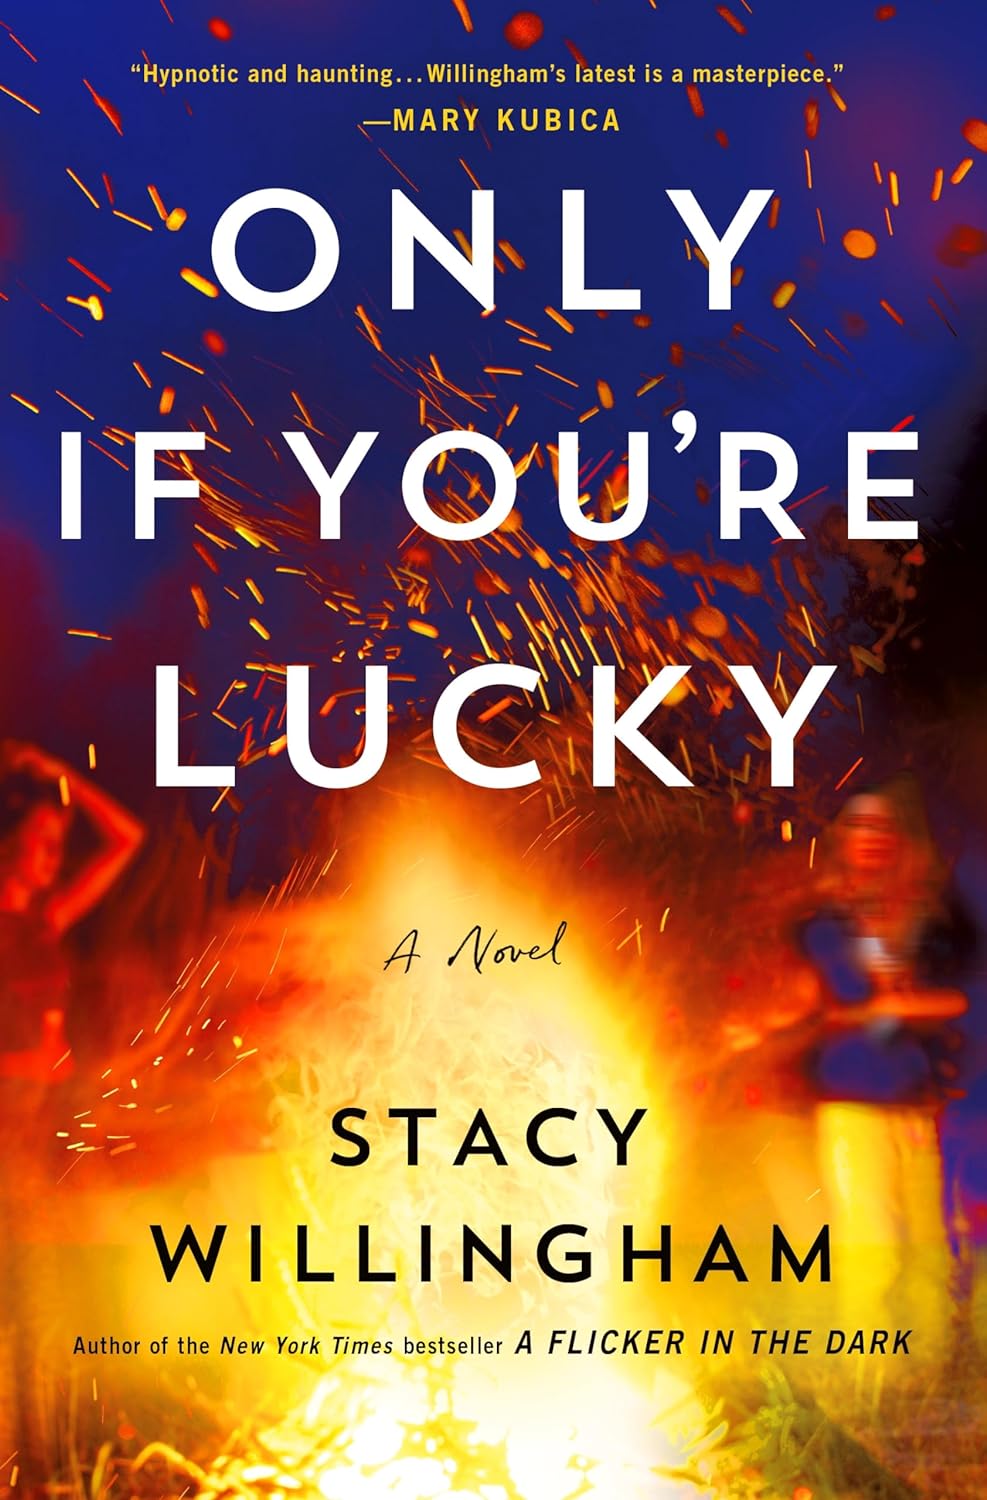 Image for "Only If You're Lucky"